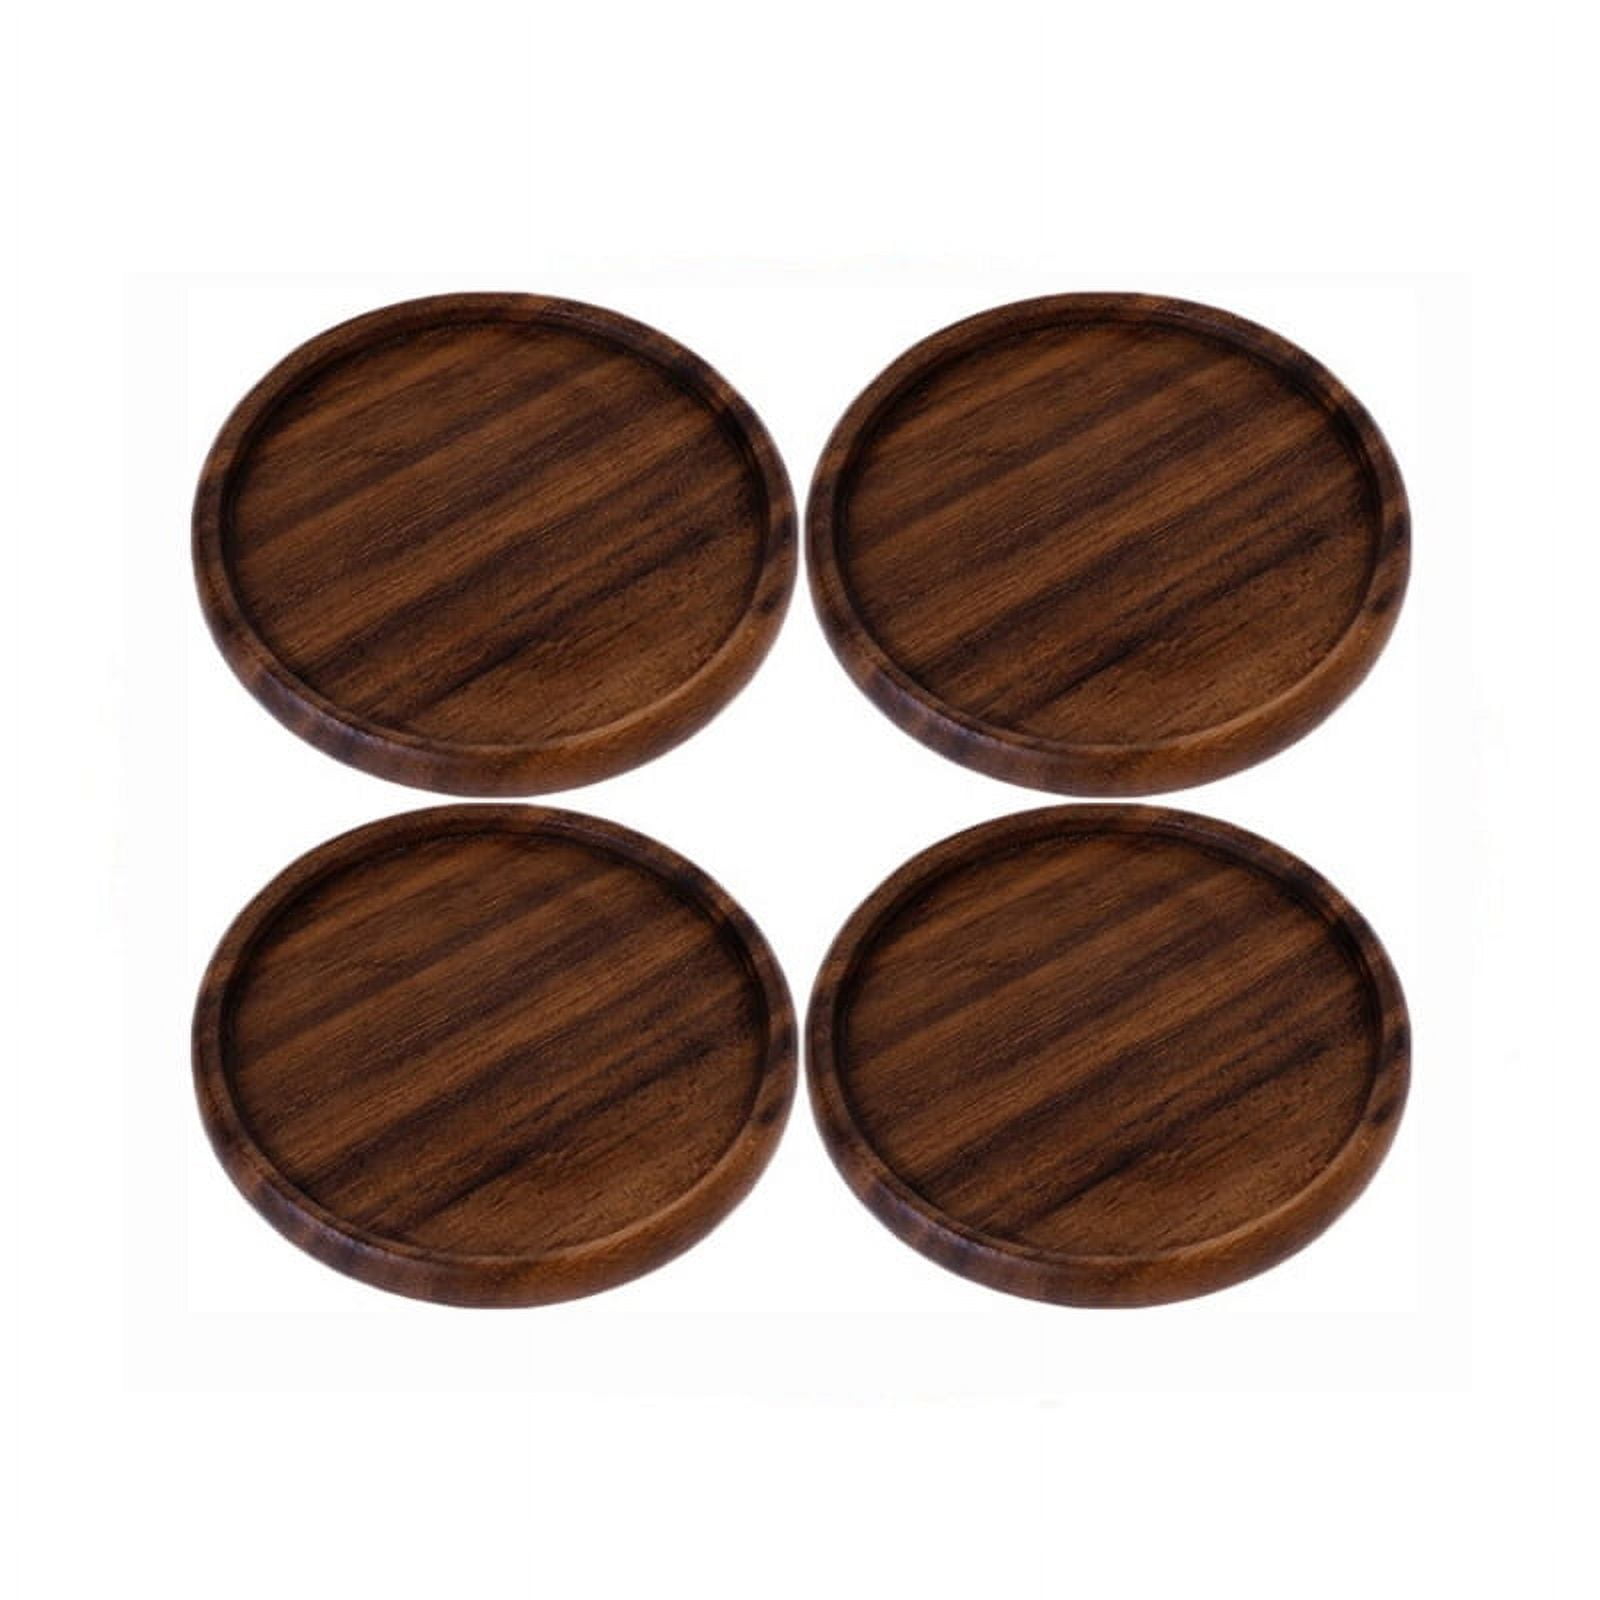 Set of 4 Wood Square Coasters Metal Holder Rustic Home Decor Drink Cup  Accessory, One Size - Ralphs